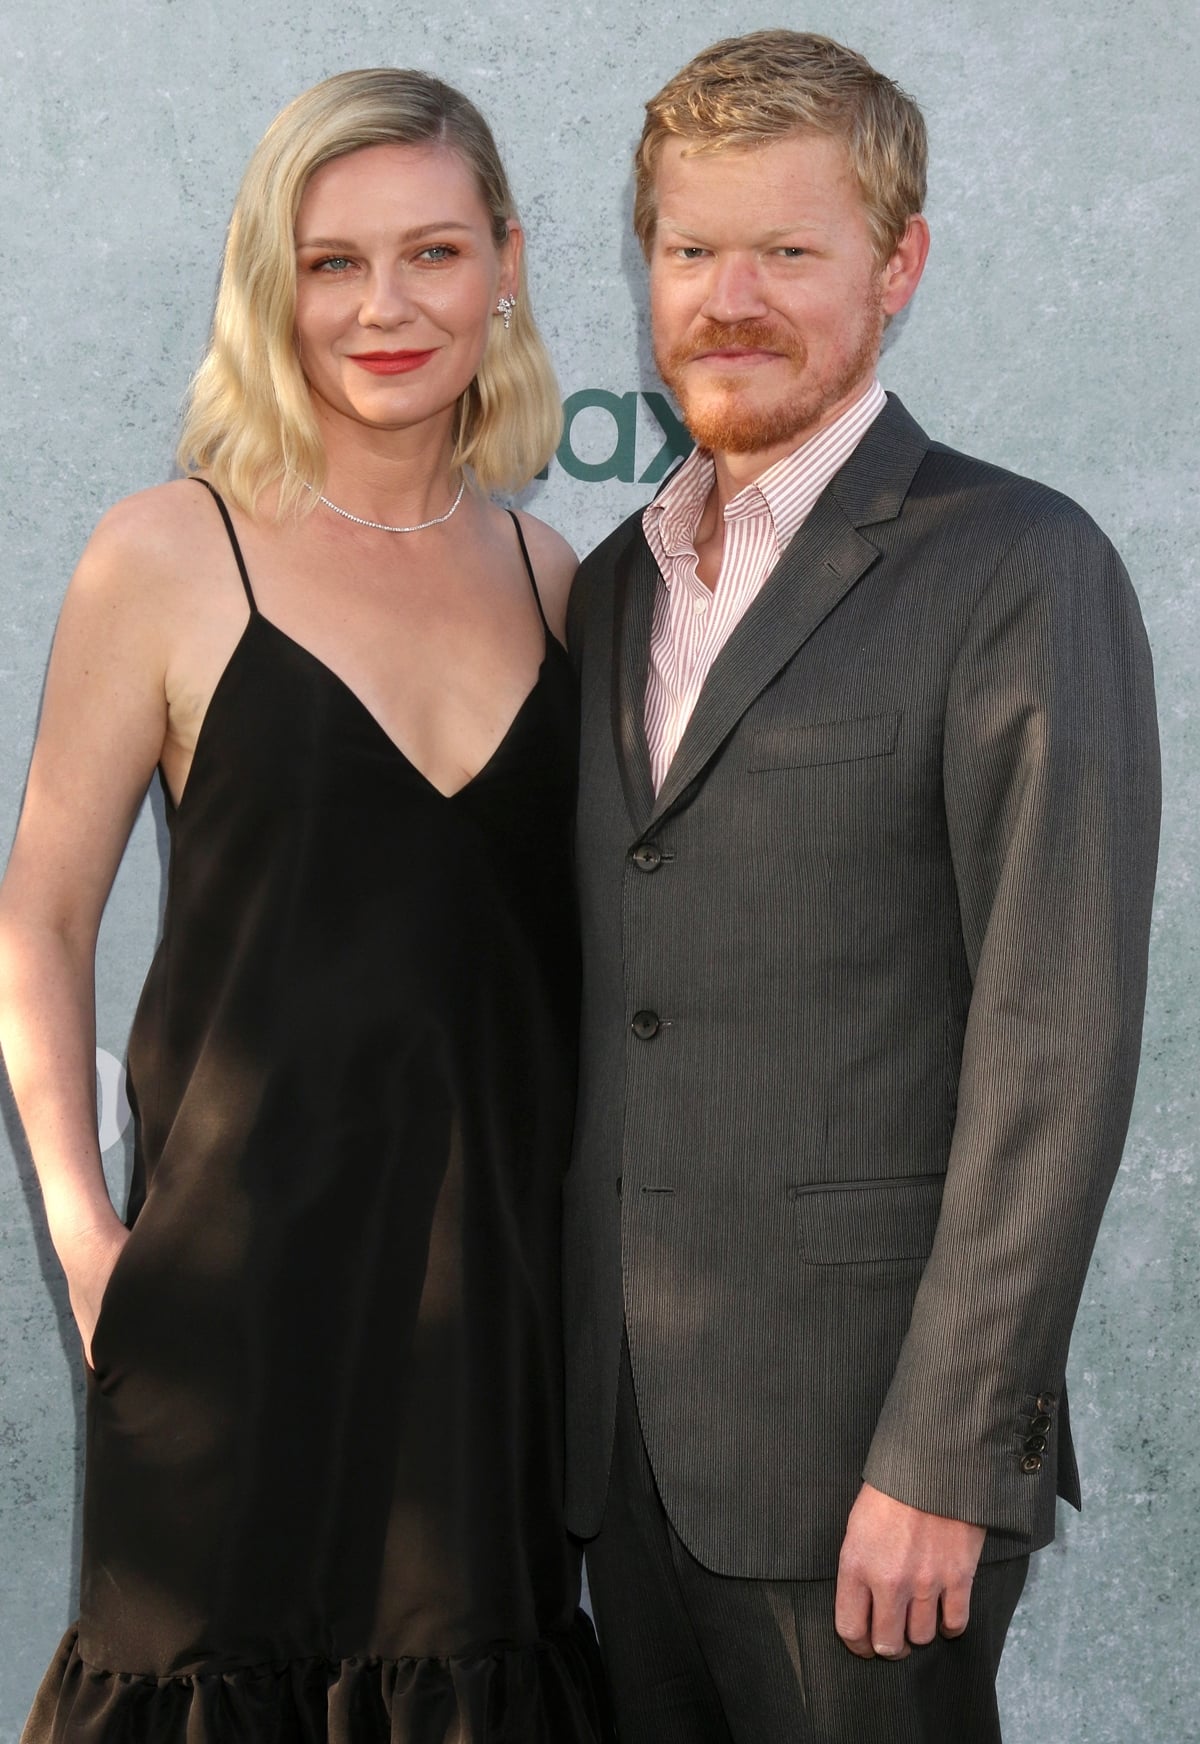 Jesse Plemons is 4.3 inches (11 cm) taller than Kirsten Dunst, with Plemons standing at approximately 5 feet 10 inches (177.8 cm) and Dunst at about 5 feet 5.5 inches (166.4 cm)